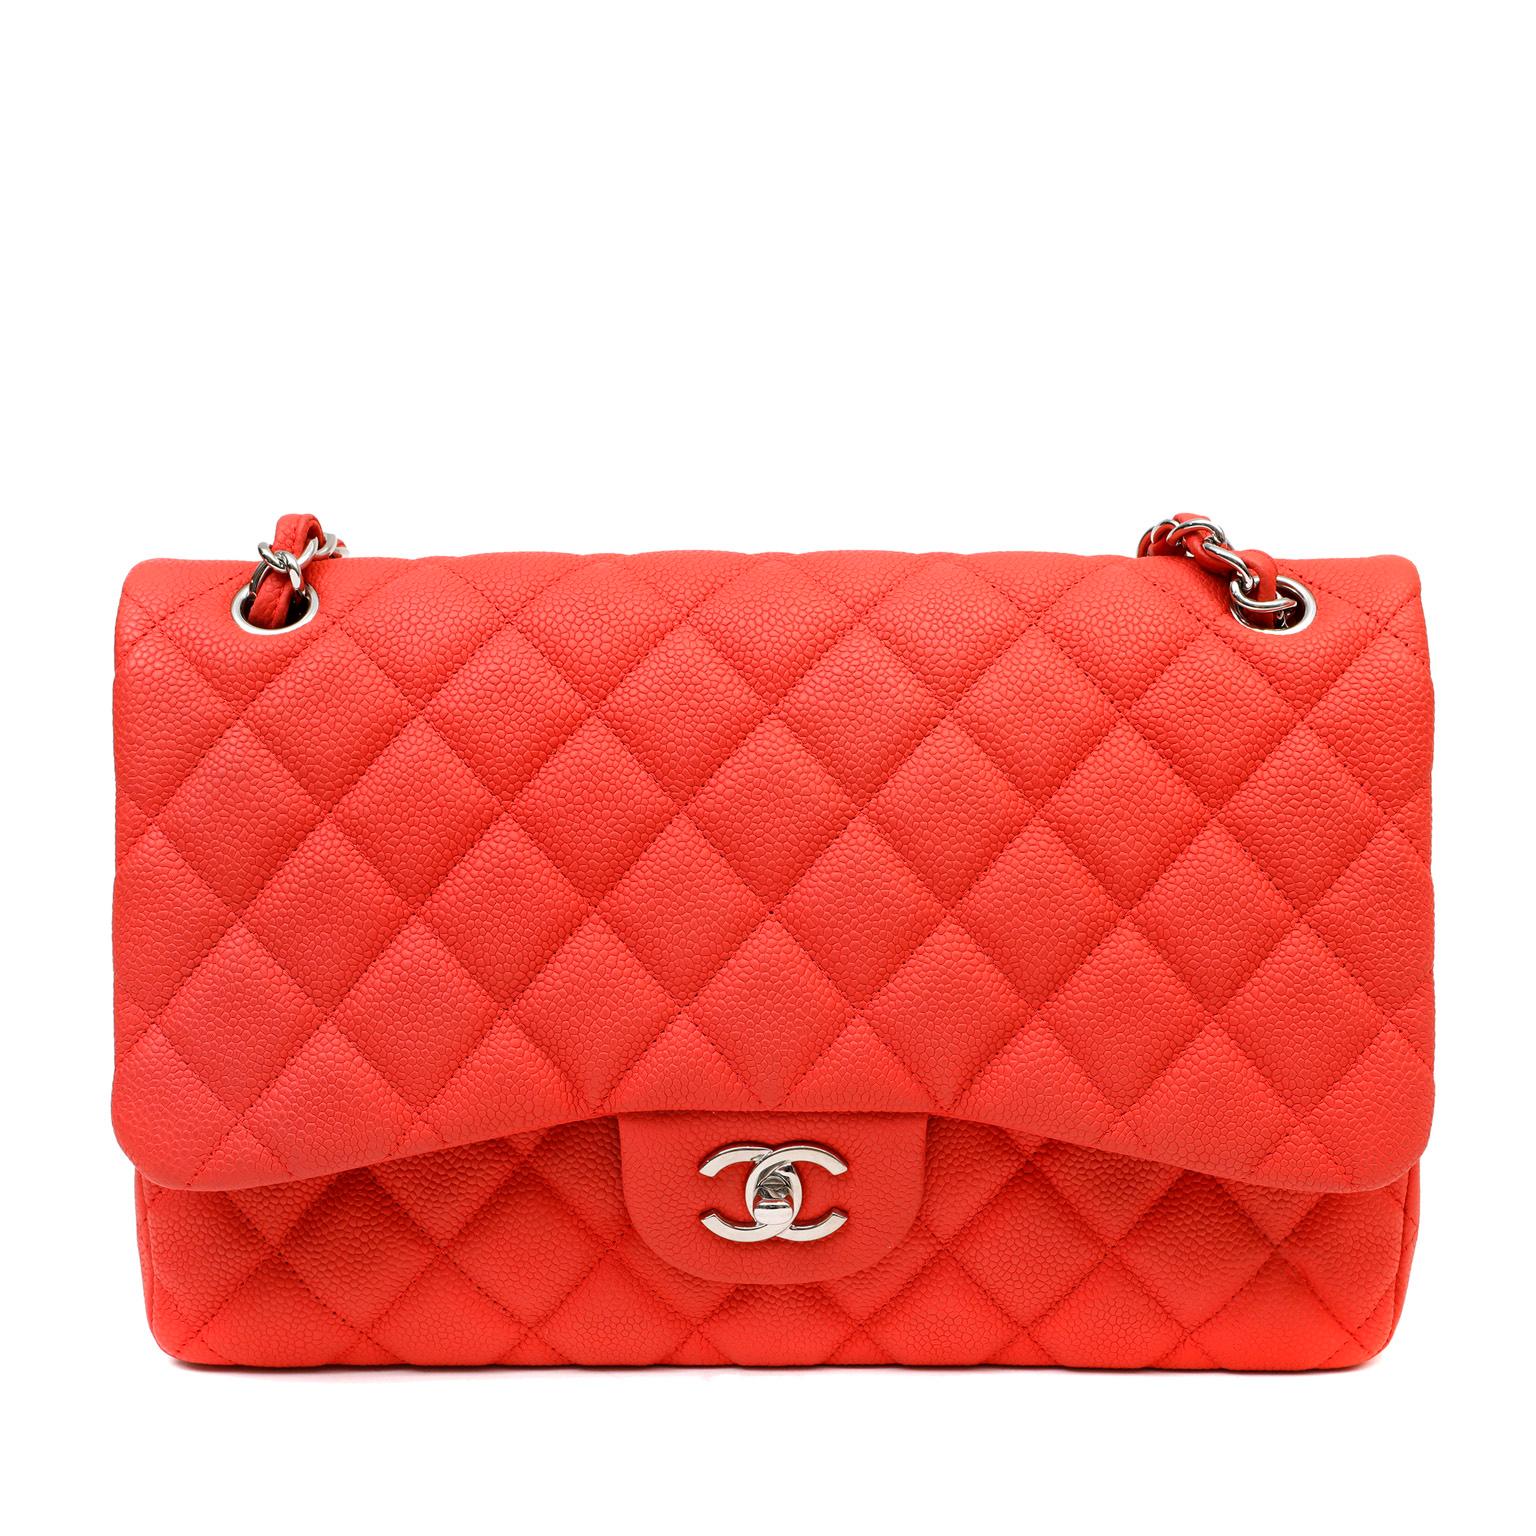 chanel large classic flap